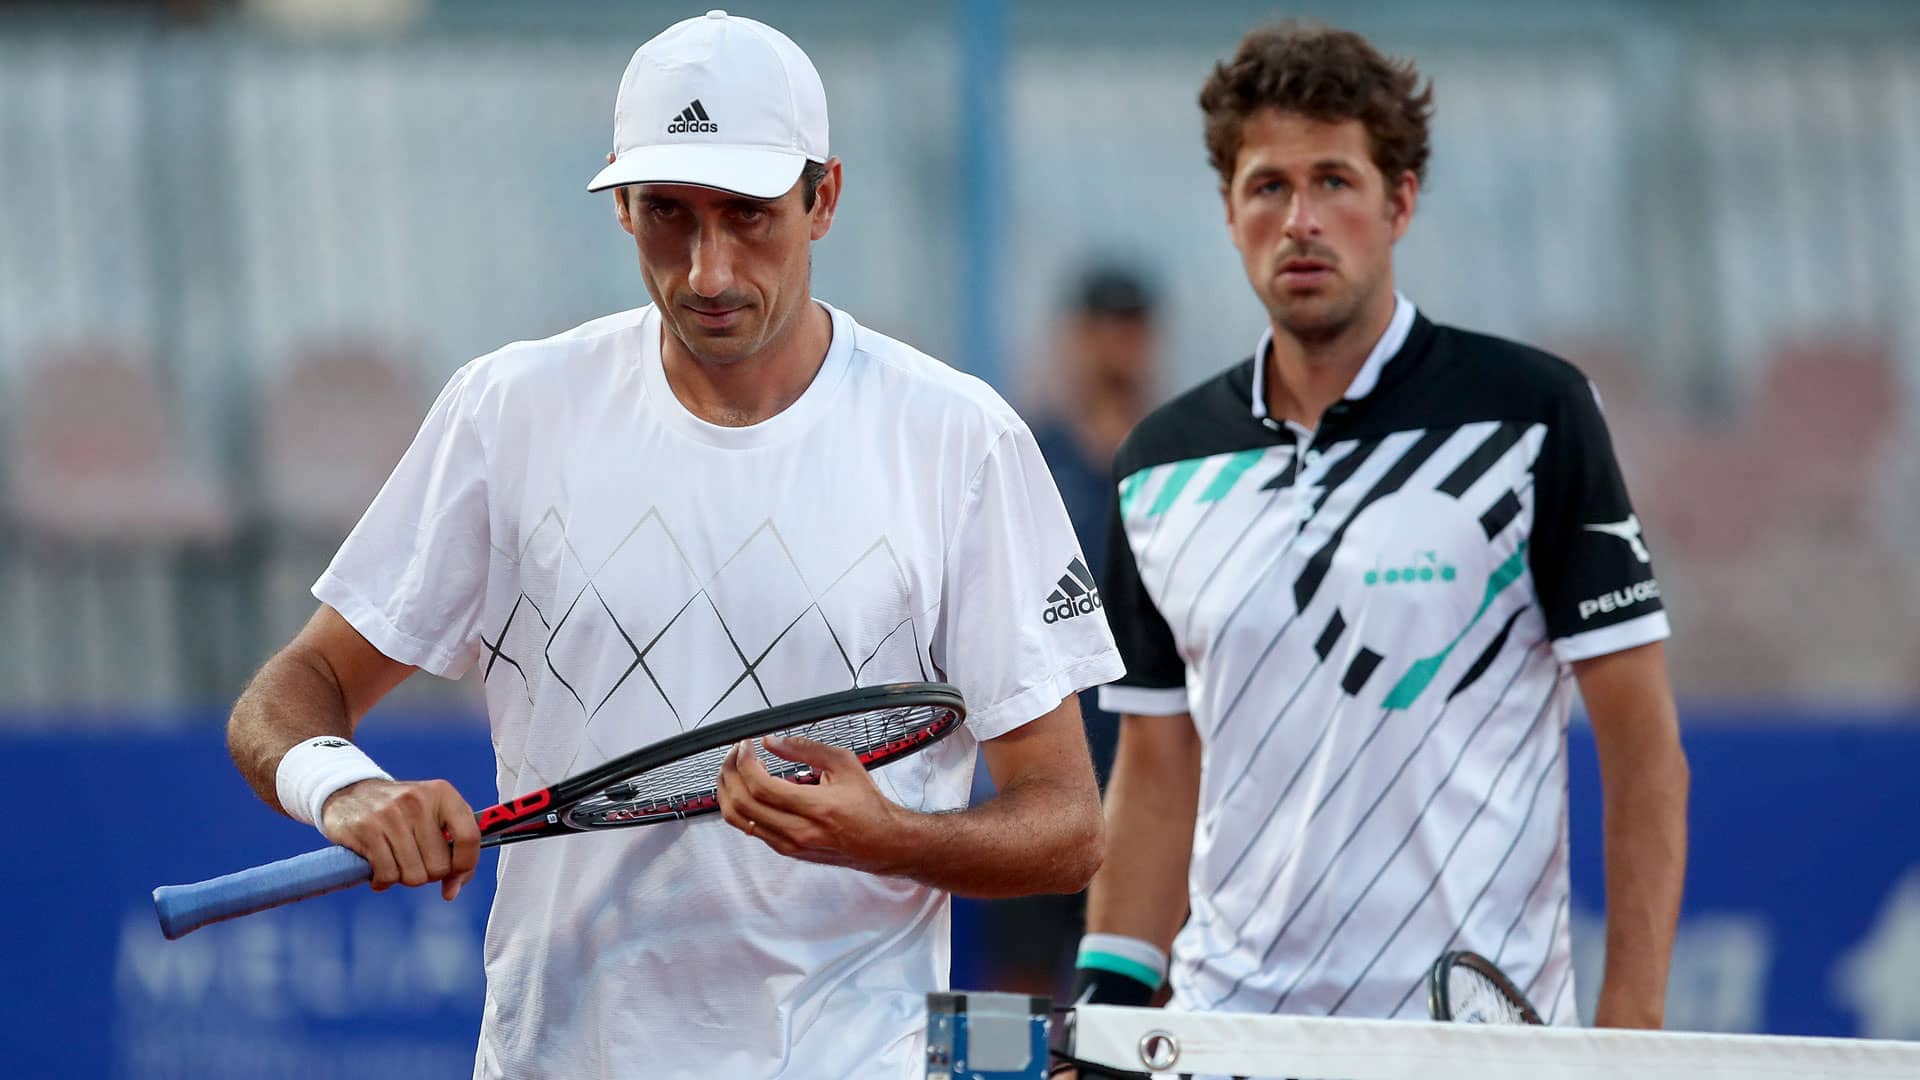 Robin Haase and Philiipp Oswald Save 2 M.P